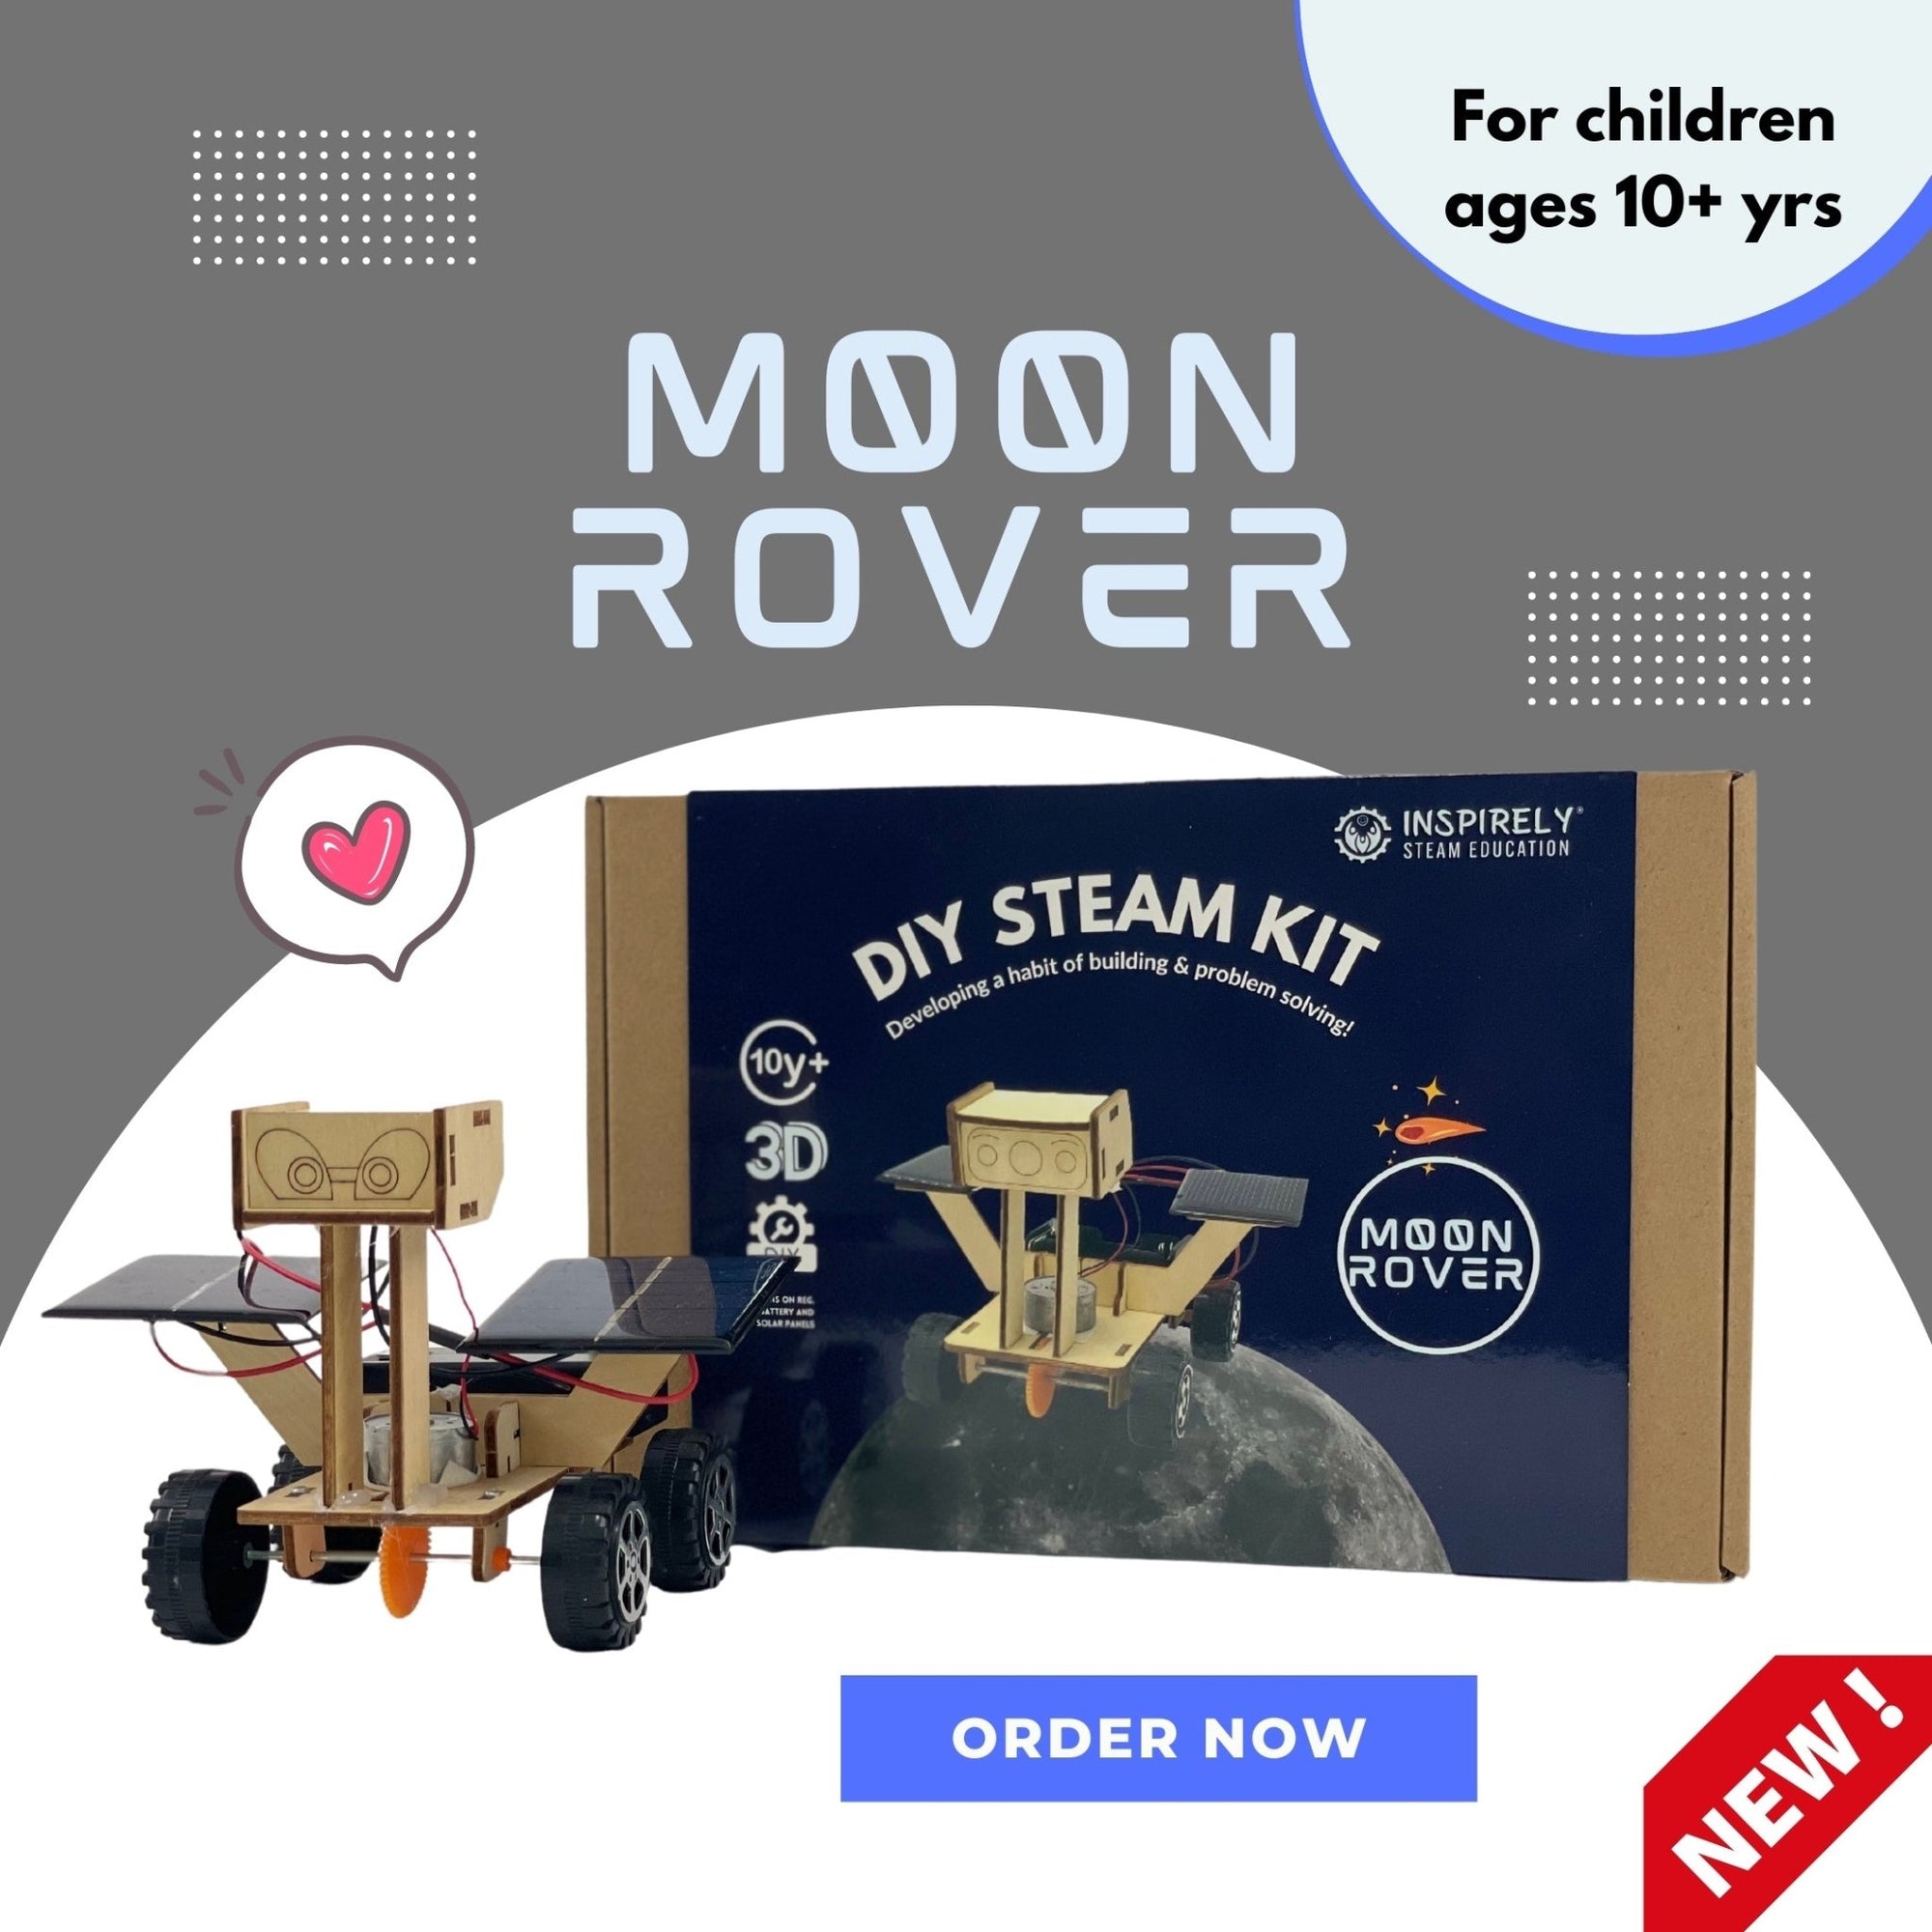 DIY Moon Rover - STEM / STEAM / Excellent Science Kit | Holiday Christmas Corporate Gift for family | Ages 6-99 years - Inspirely | STEAM Education Do It Yourself engineering science school project STEM STEAM Kits activity box Building Art Kit Craft workshop Kid boy girl wooden math subscription educational toy top best parent choice engineering science robotics 2022 parent choice educational learning cool wow best   corporate holiday birthday Christmas gift for employees with family growth